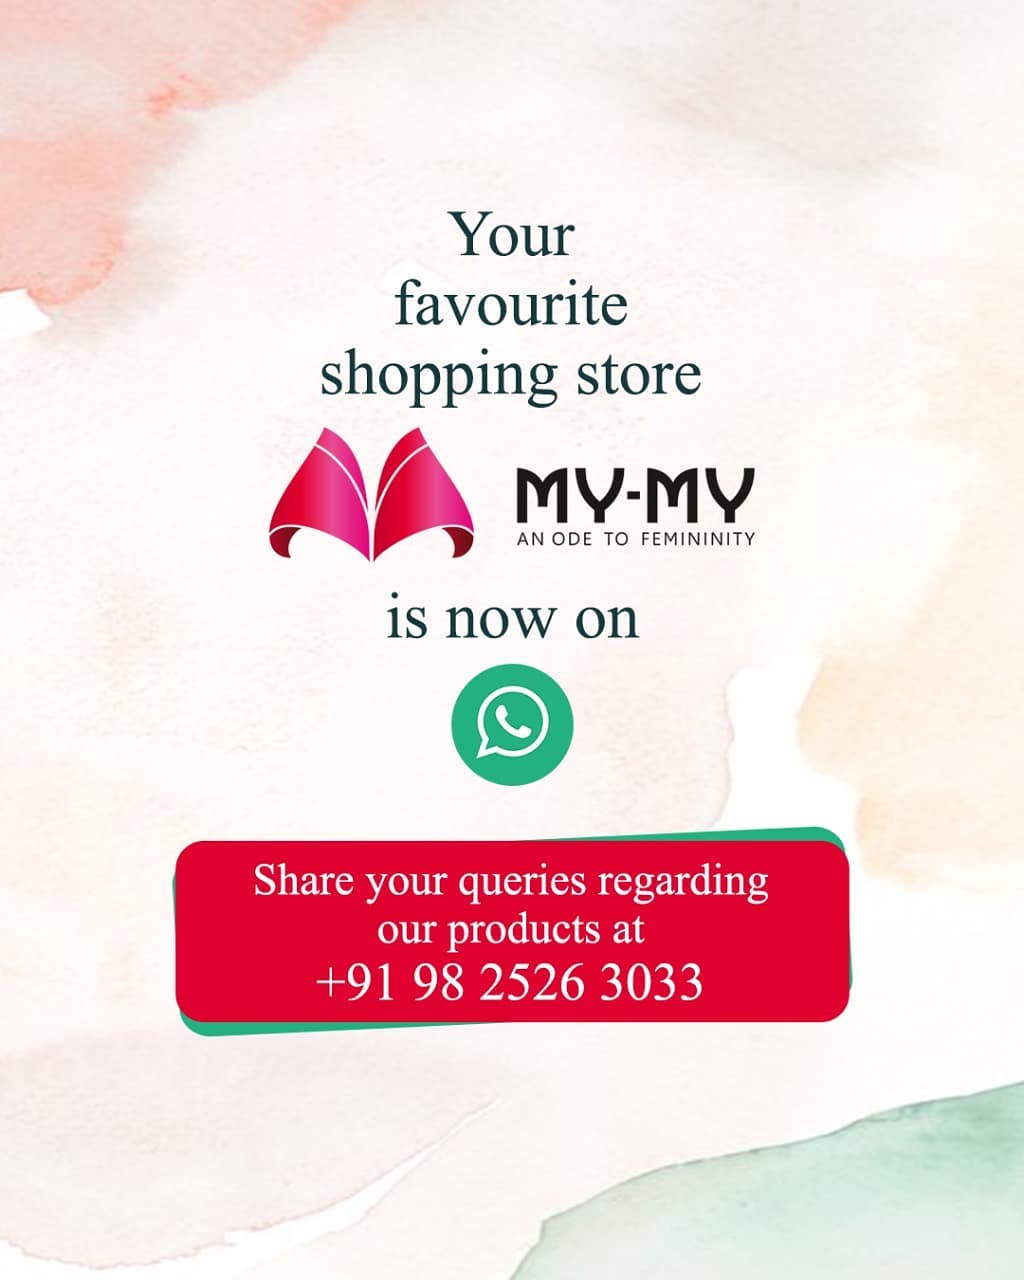 Avoid the rush and get all your queries solved on WhatsApp.

Ping us at +91 98 2526 3033 to know more about your favourite collection from My-My stores

.
#MyMy #MyMyCollection #reopening #Clothing #Fashion #Outfit #FashionOutfit #summerwear #nightwear #intimatewear #swimwear #cosmetics #swimwearfashion #summeroutfits #Style #fashioninahmedabad 
#ahmedabadclothing #ahmedabadfashion #gujaratfashion #WomensFashion #Ahmedabad